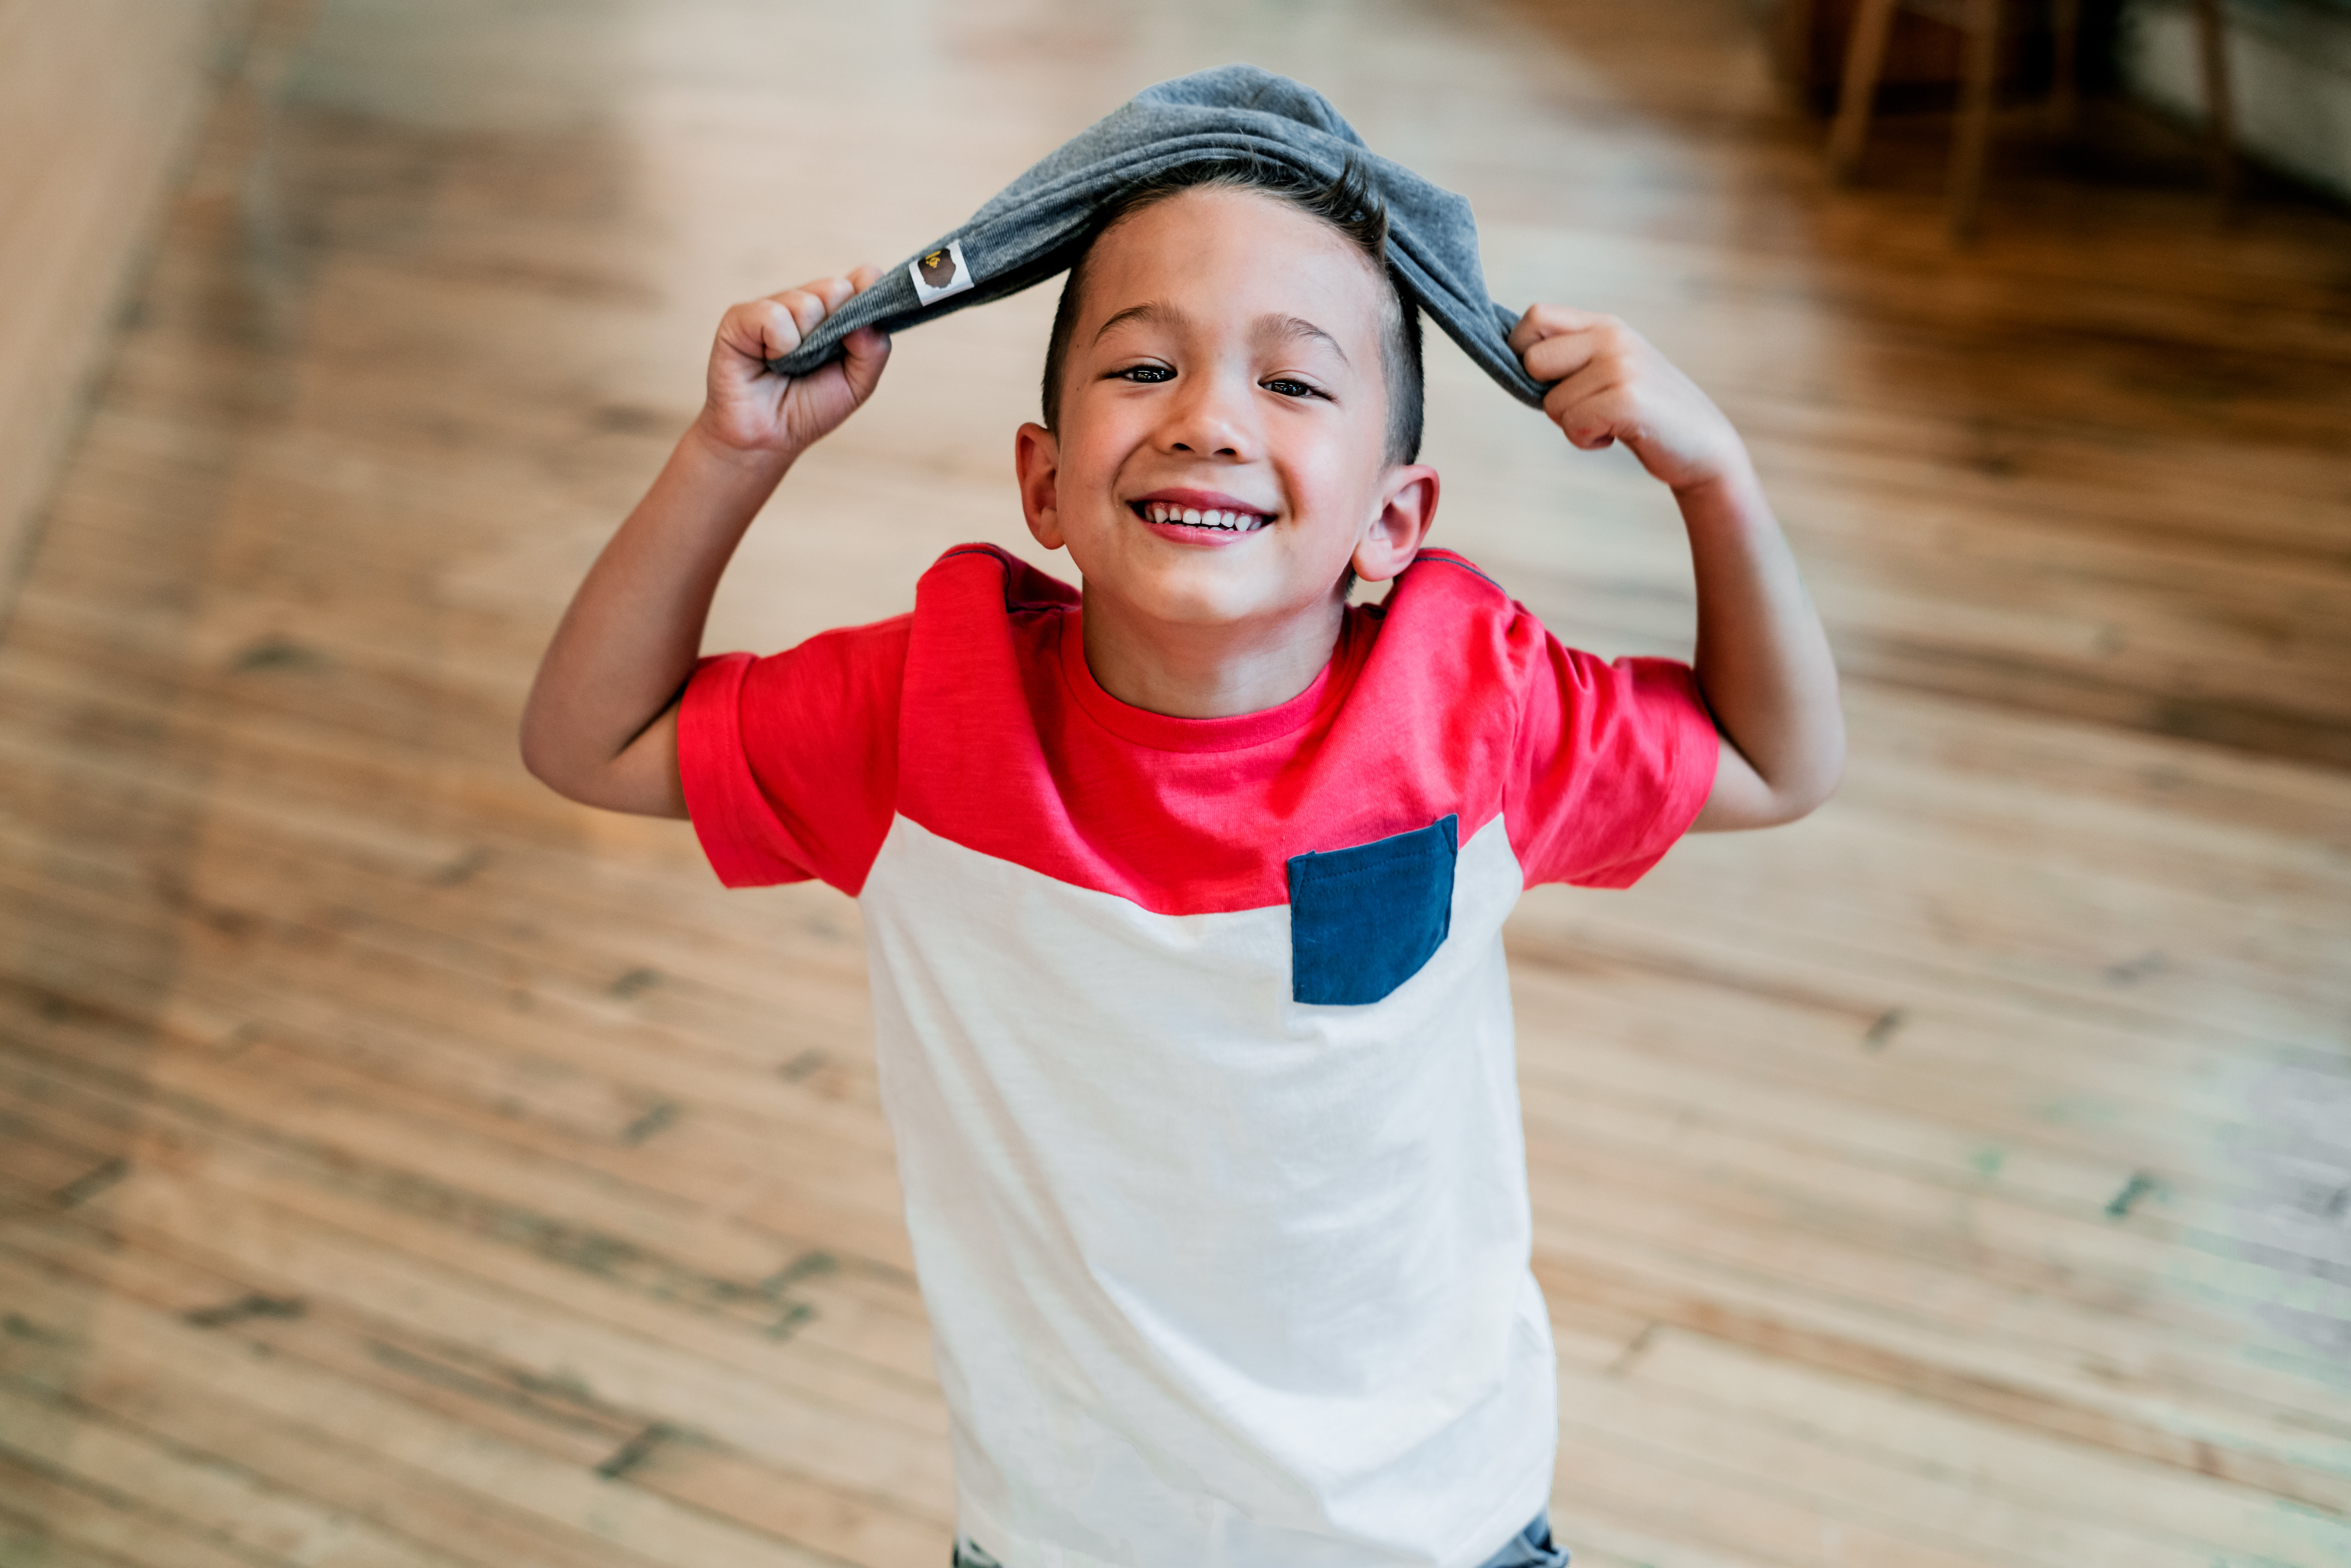 Jeans Kid Stock Photos and Images - 123RF